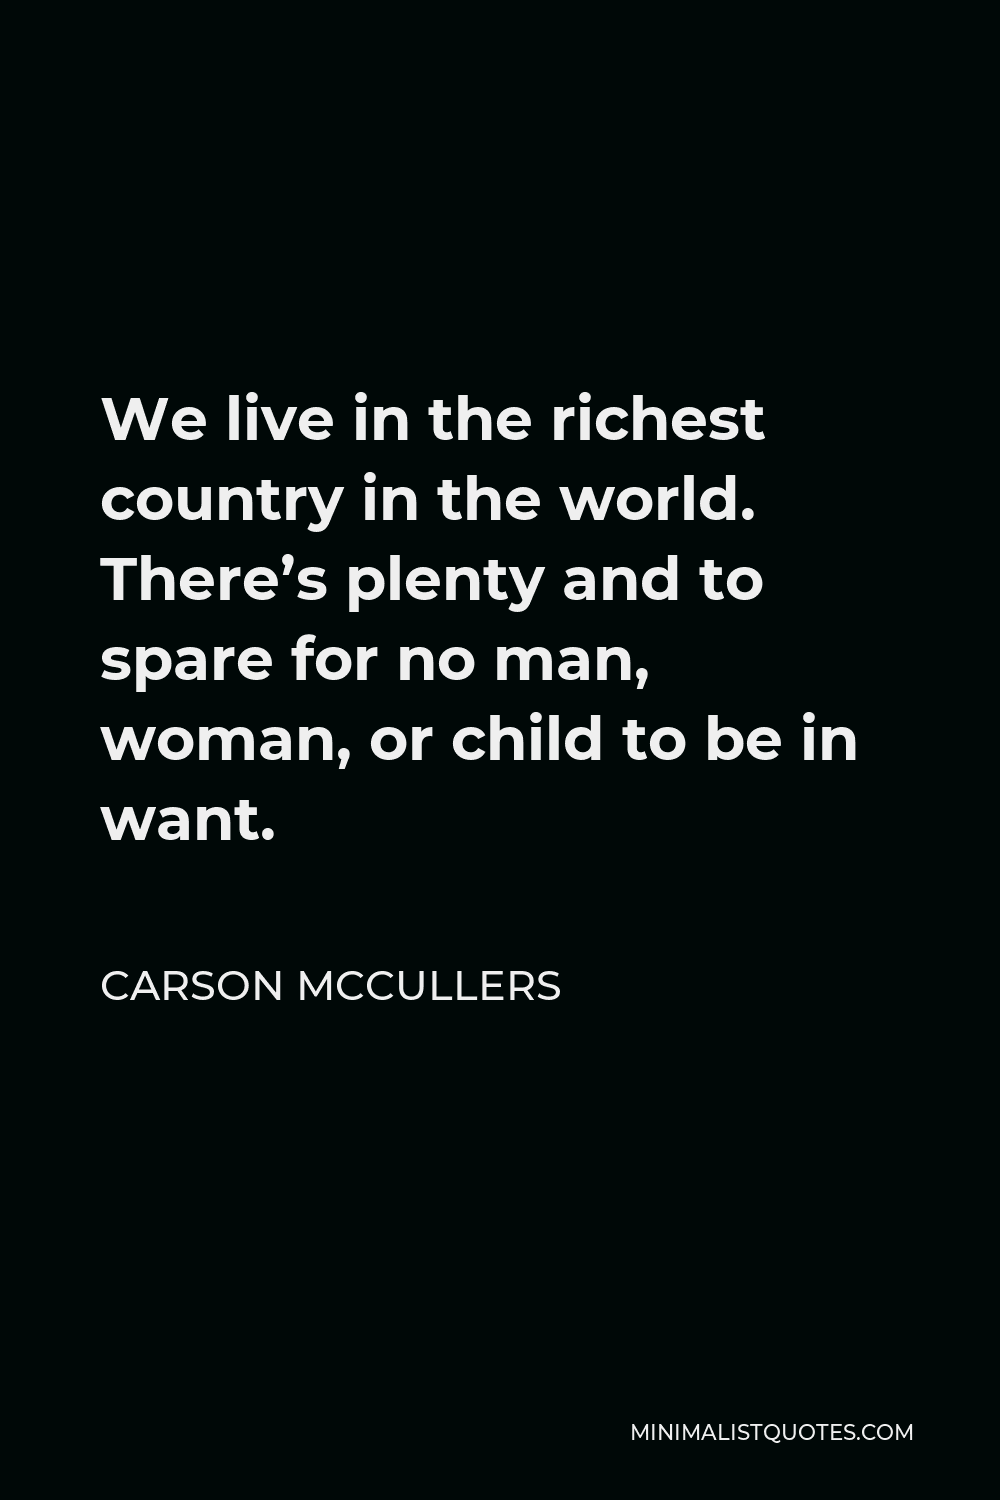 Carson McCullers Quote - We live in the richest country in the world. There’s plenty and to spare for no man, woman, or child to be in want.